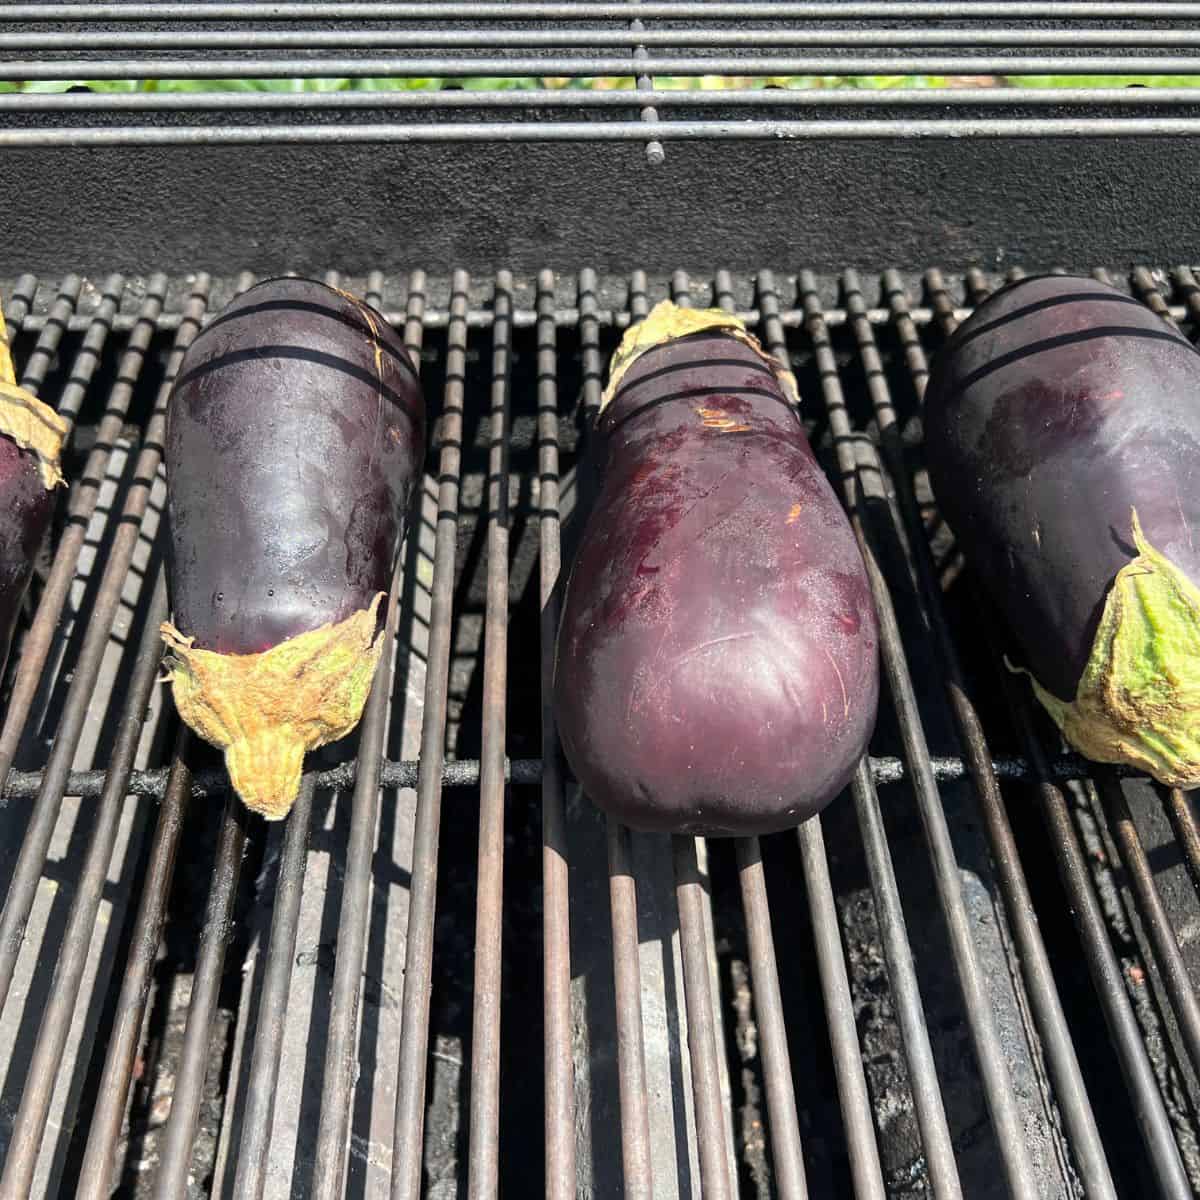 Eggplants on a grill